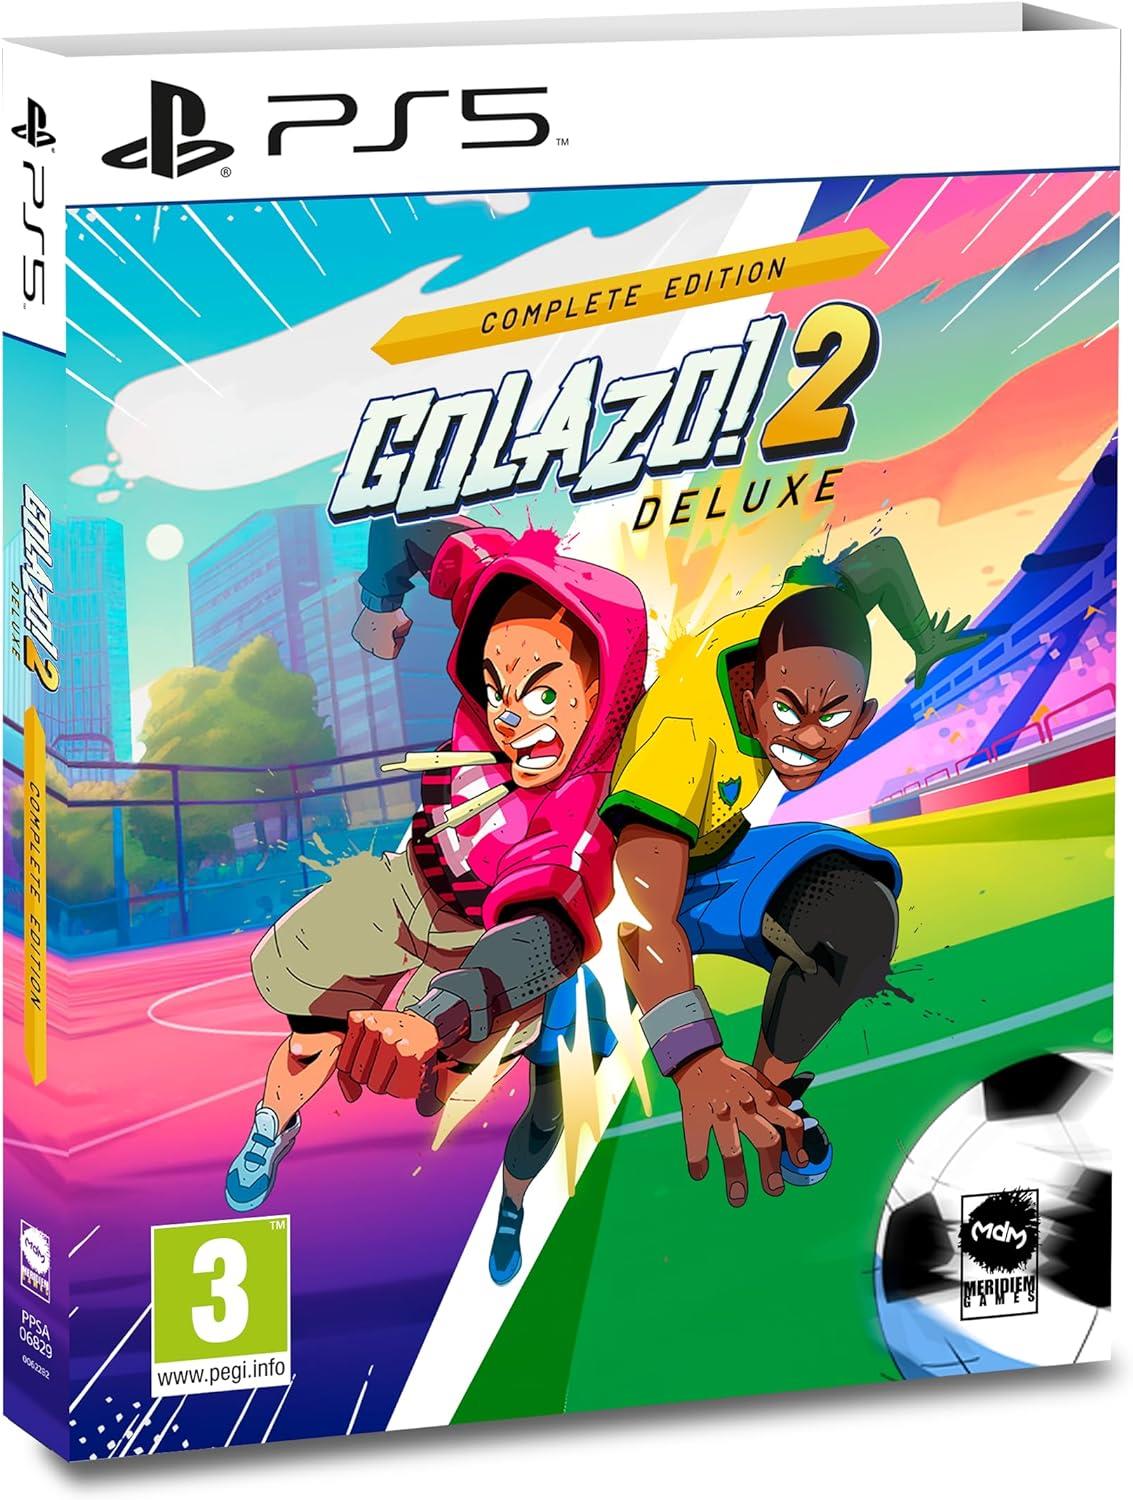 Golazo! 2 Deluxe Complete Edition PS5 Game